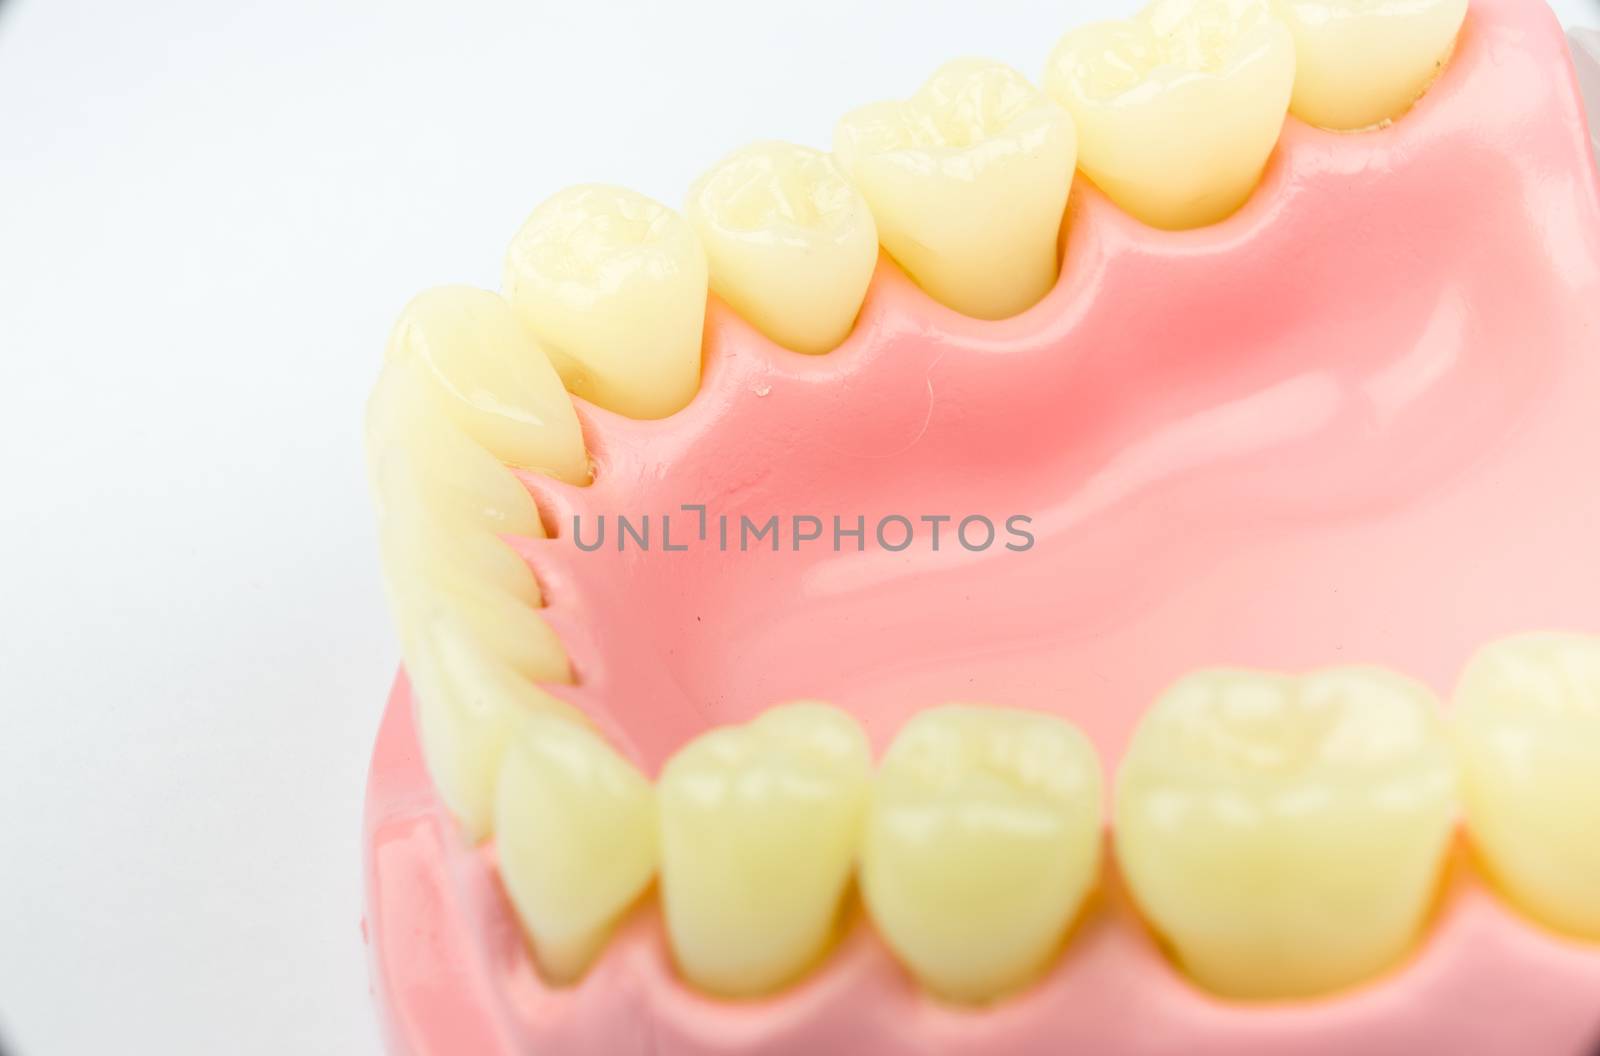 Denture for dental concept on white background by Alicephoto